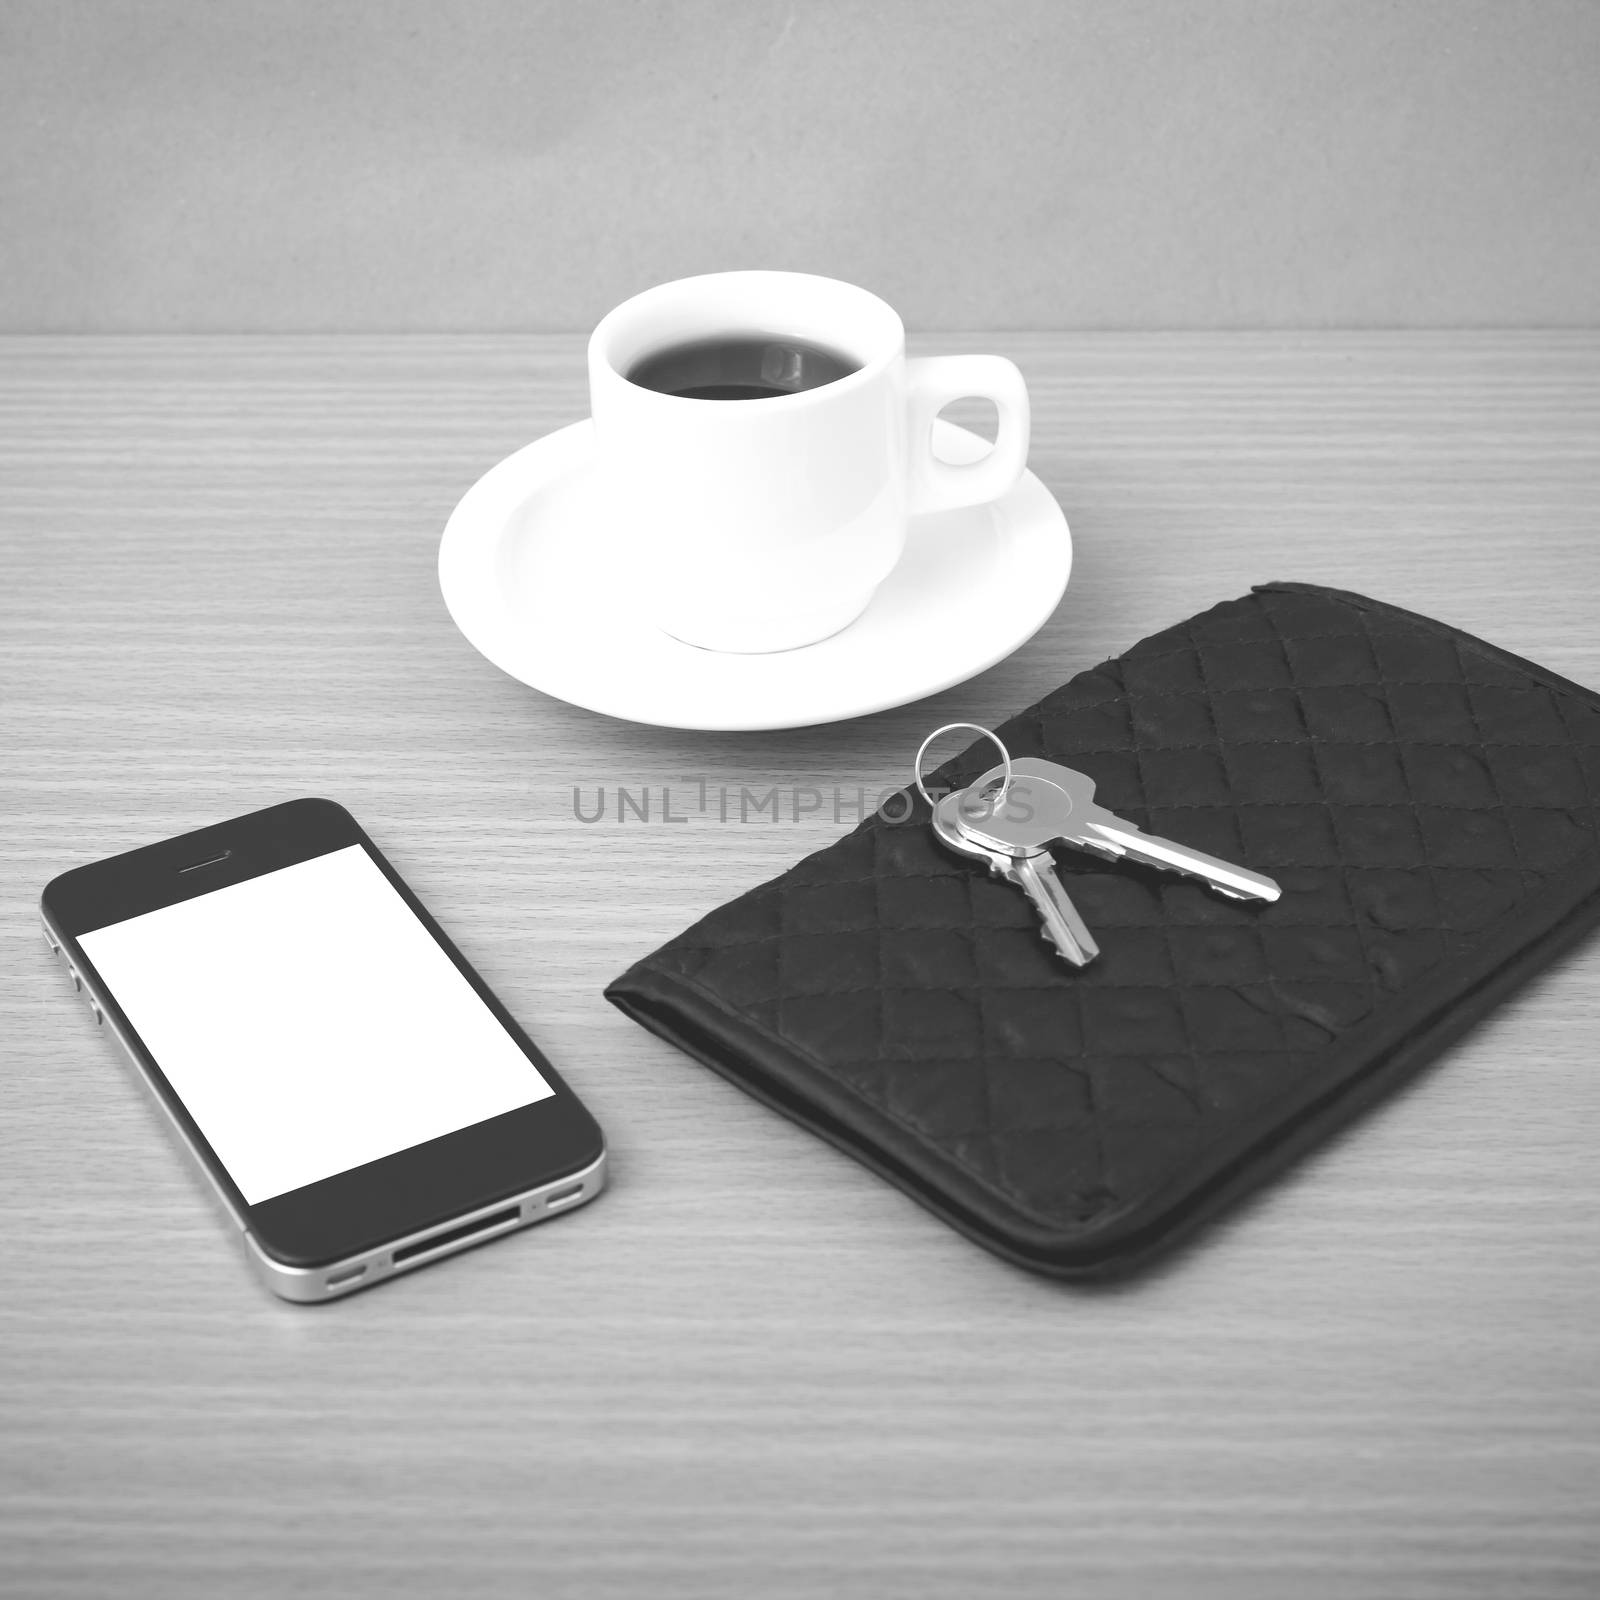 coffee phone key and wallet on wood table background black and white color